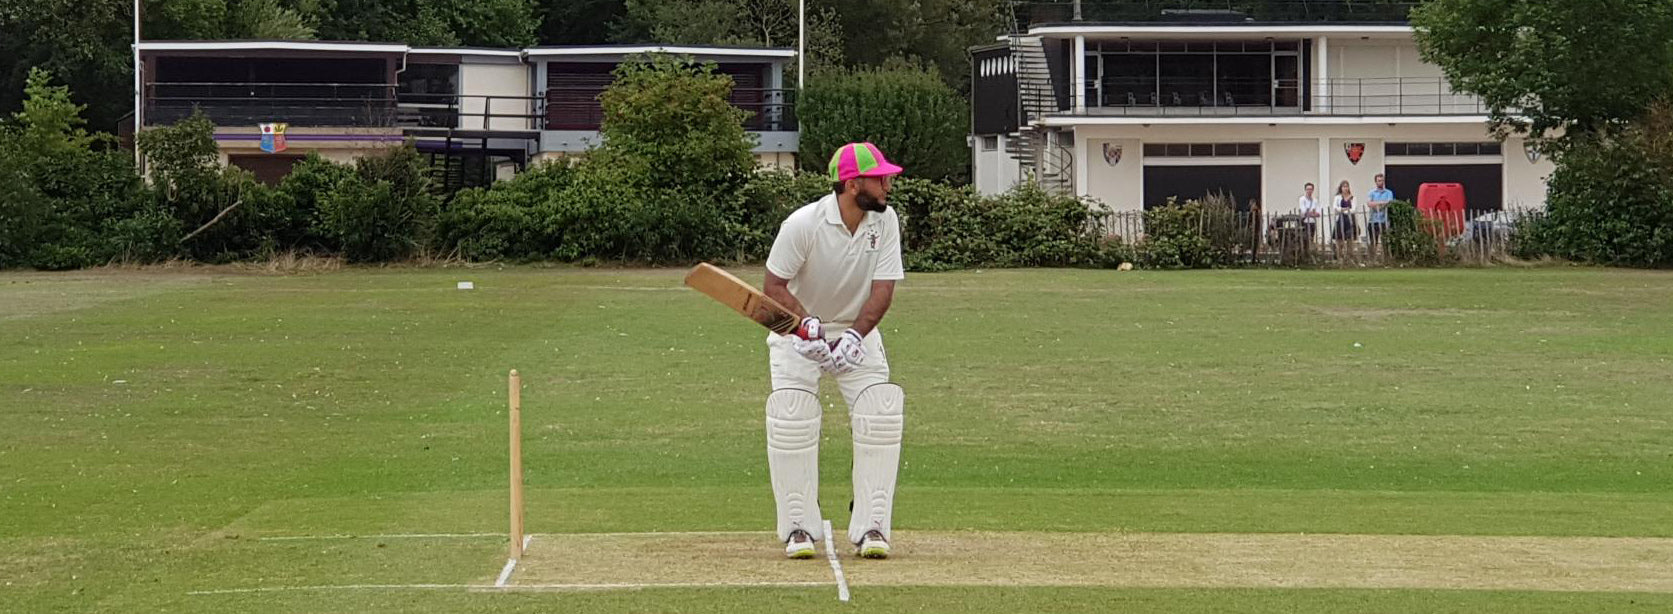 Ali Baloch Ready And Steady At The Crease To Face His First Ball Against Nevil Holt CC